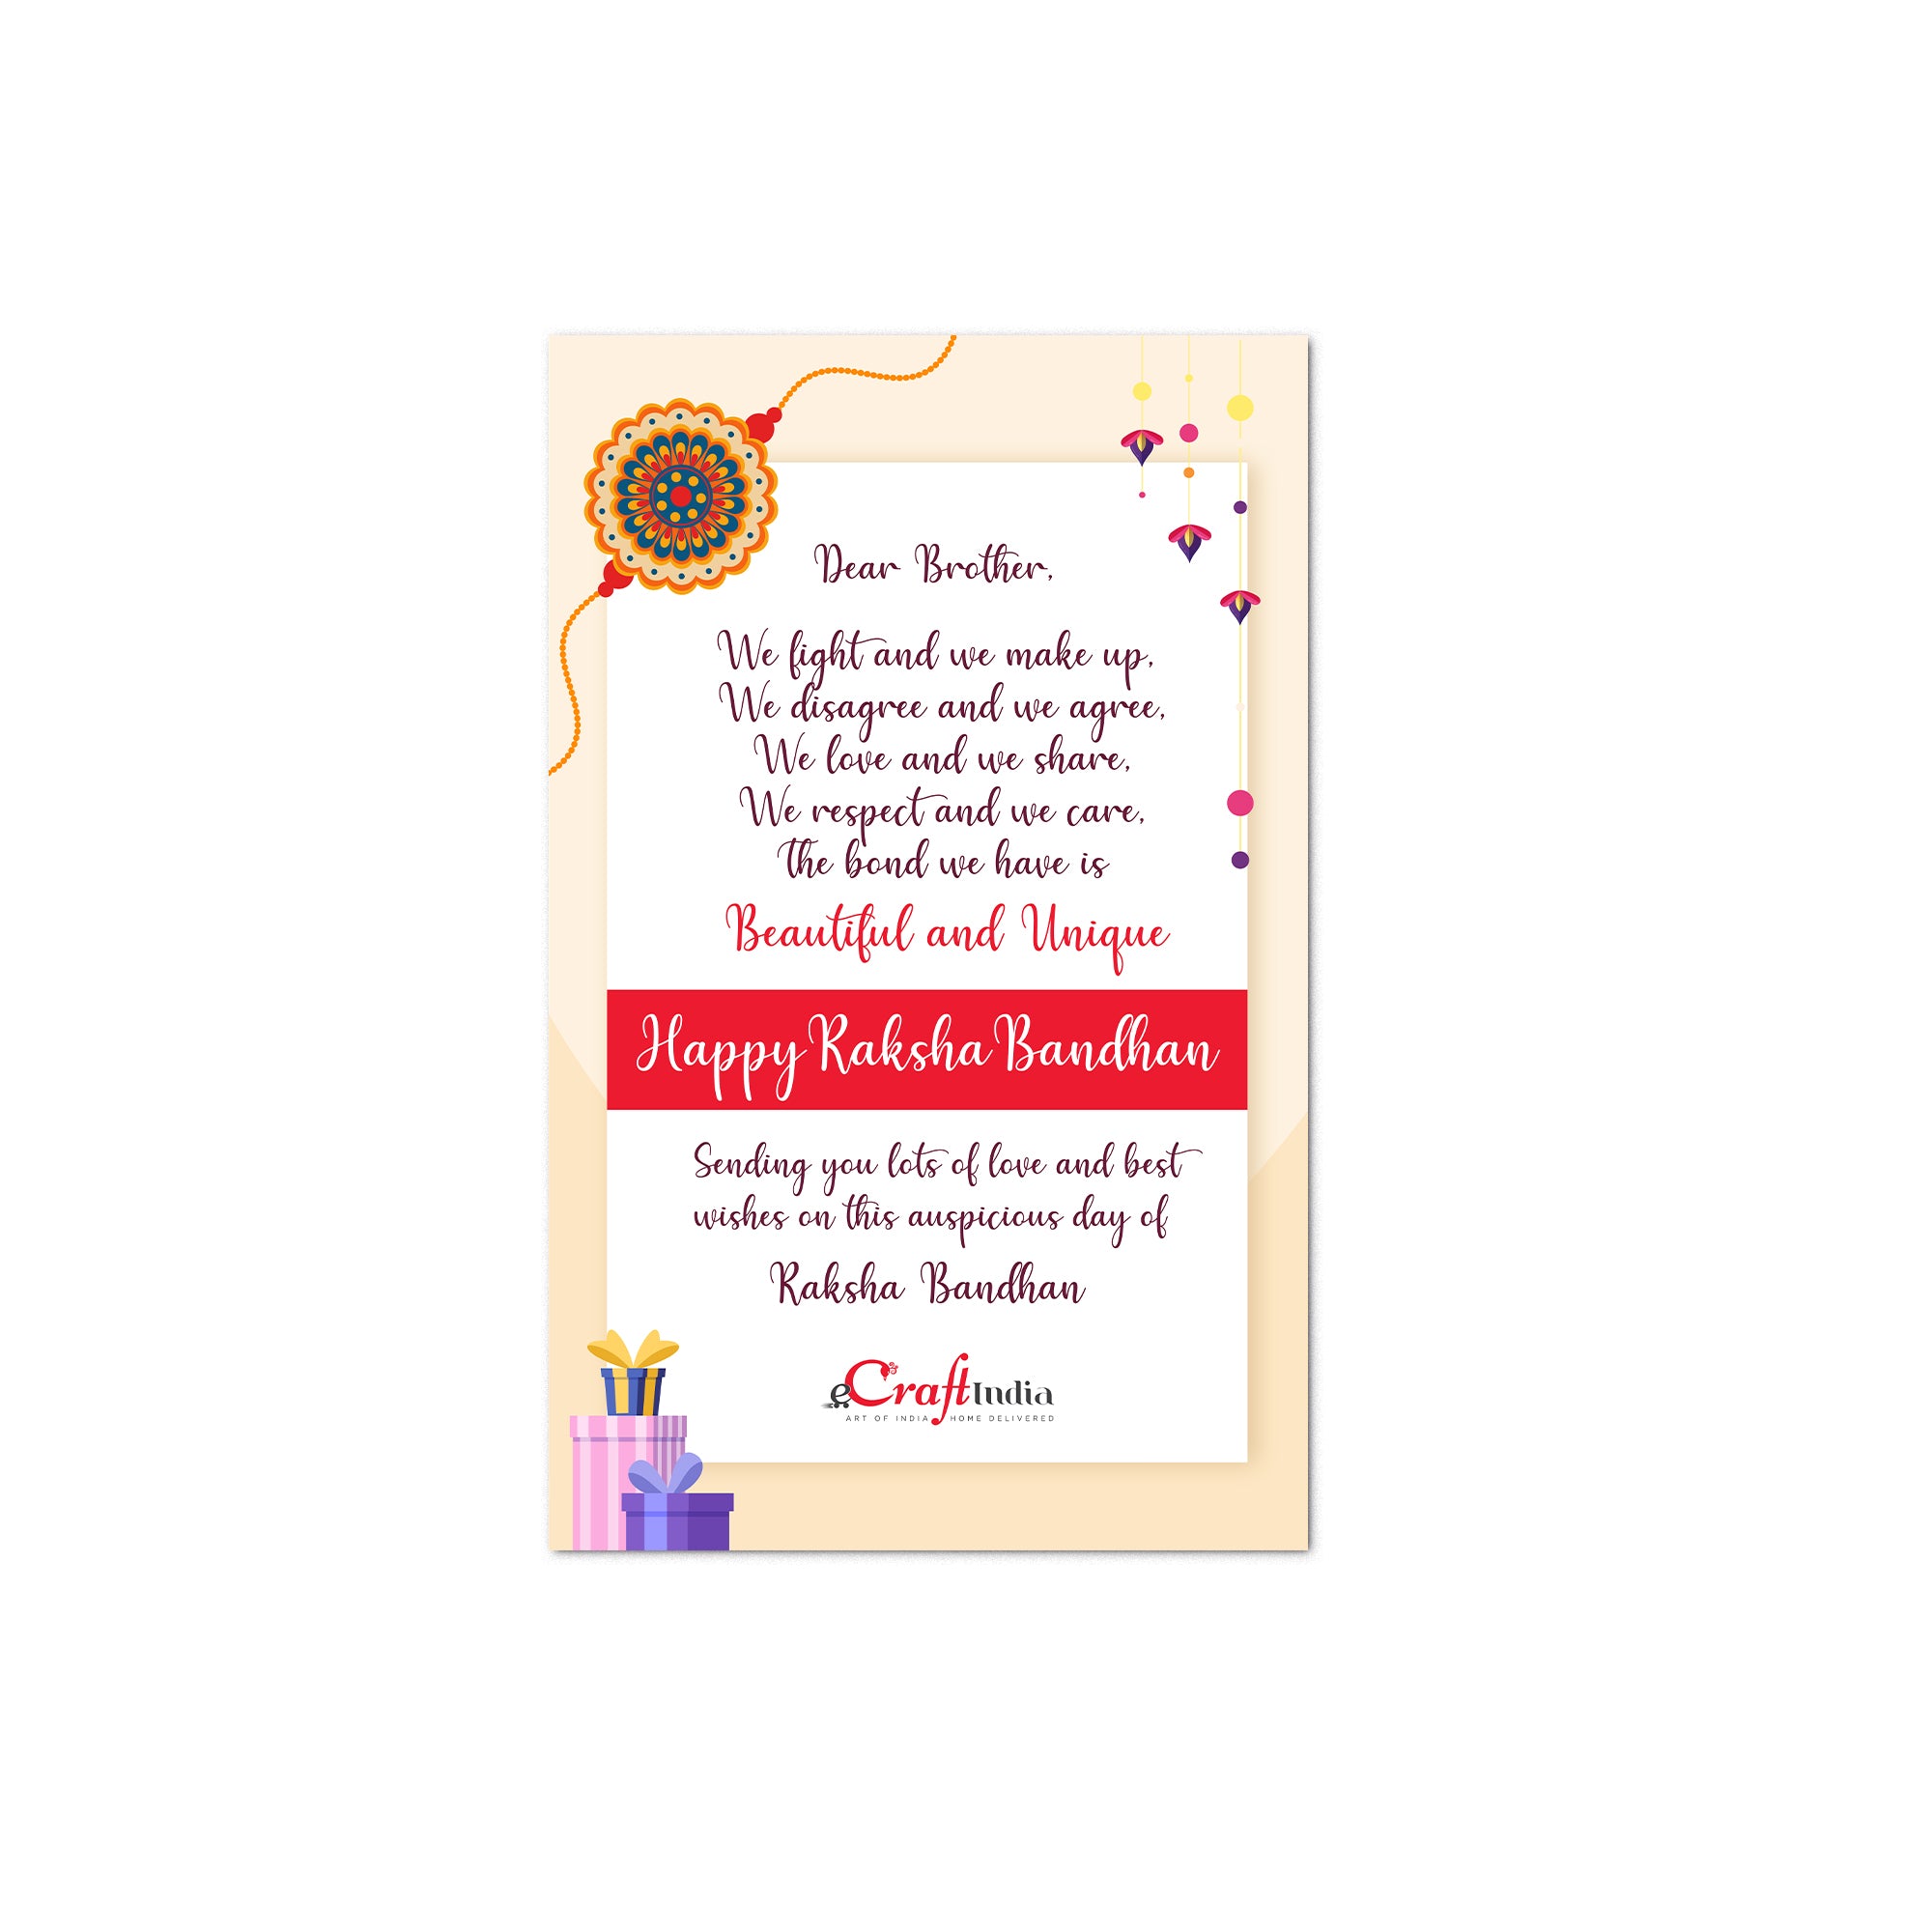 Designer Rakhi with Soan Papdi (500 Gm) and Roli Chawal Pack, Best Wishes Greeting Card 4